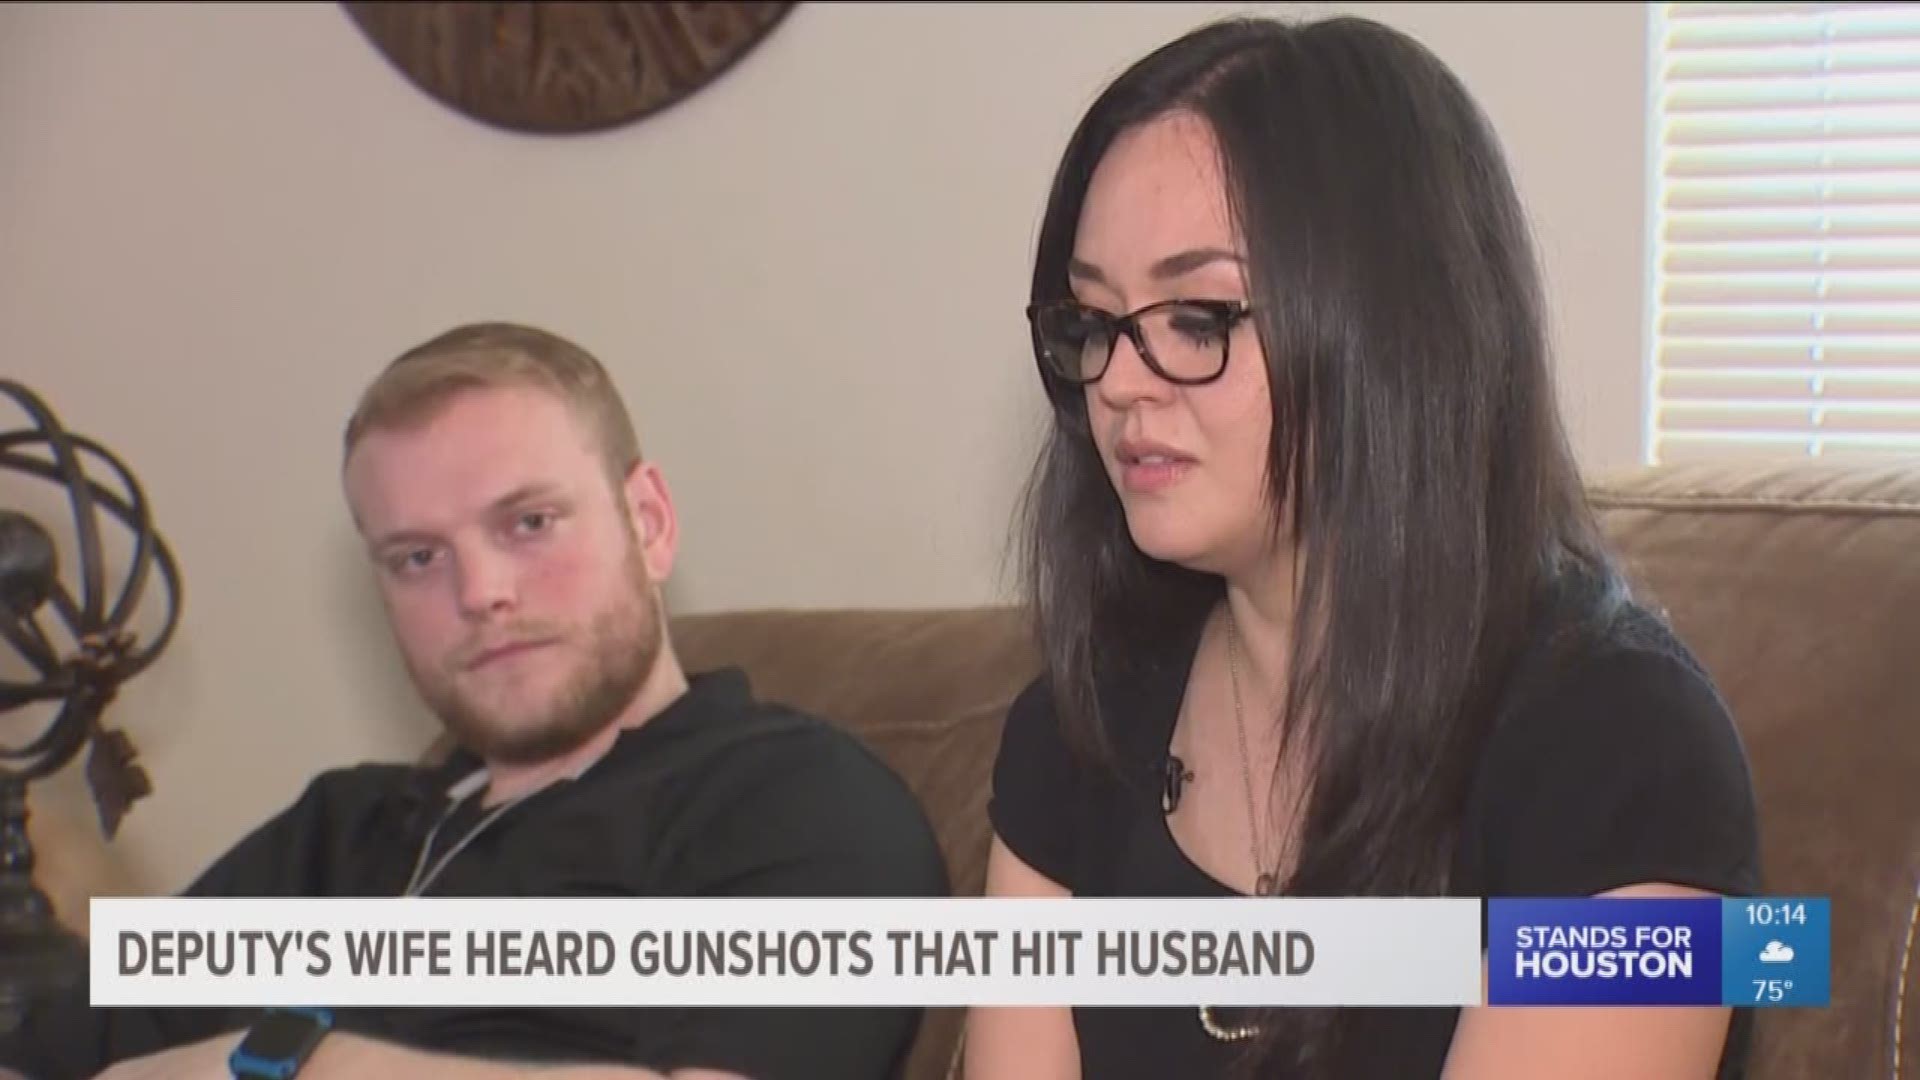 It's been almost a month since Pct 4 Deputy Christopher Gaines was gunned down while responding to a call in Atascocita and for the first time his wife, who heard the gunshots, is sharing her side of the story.